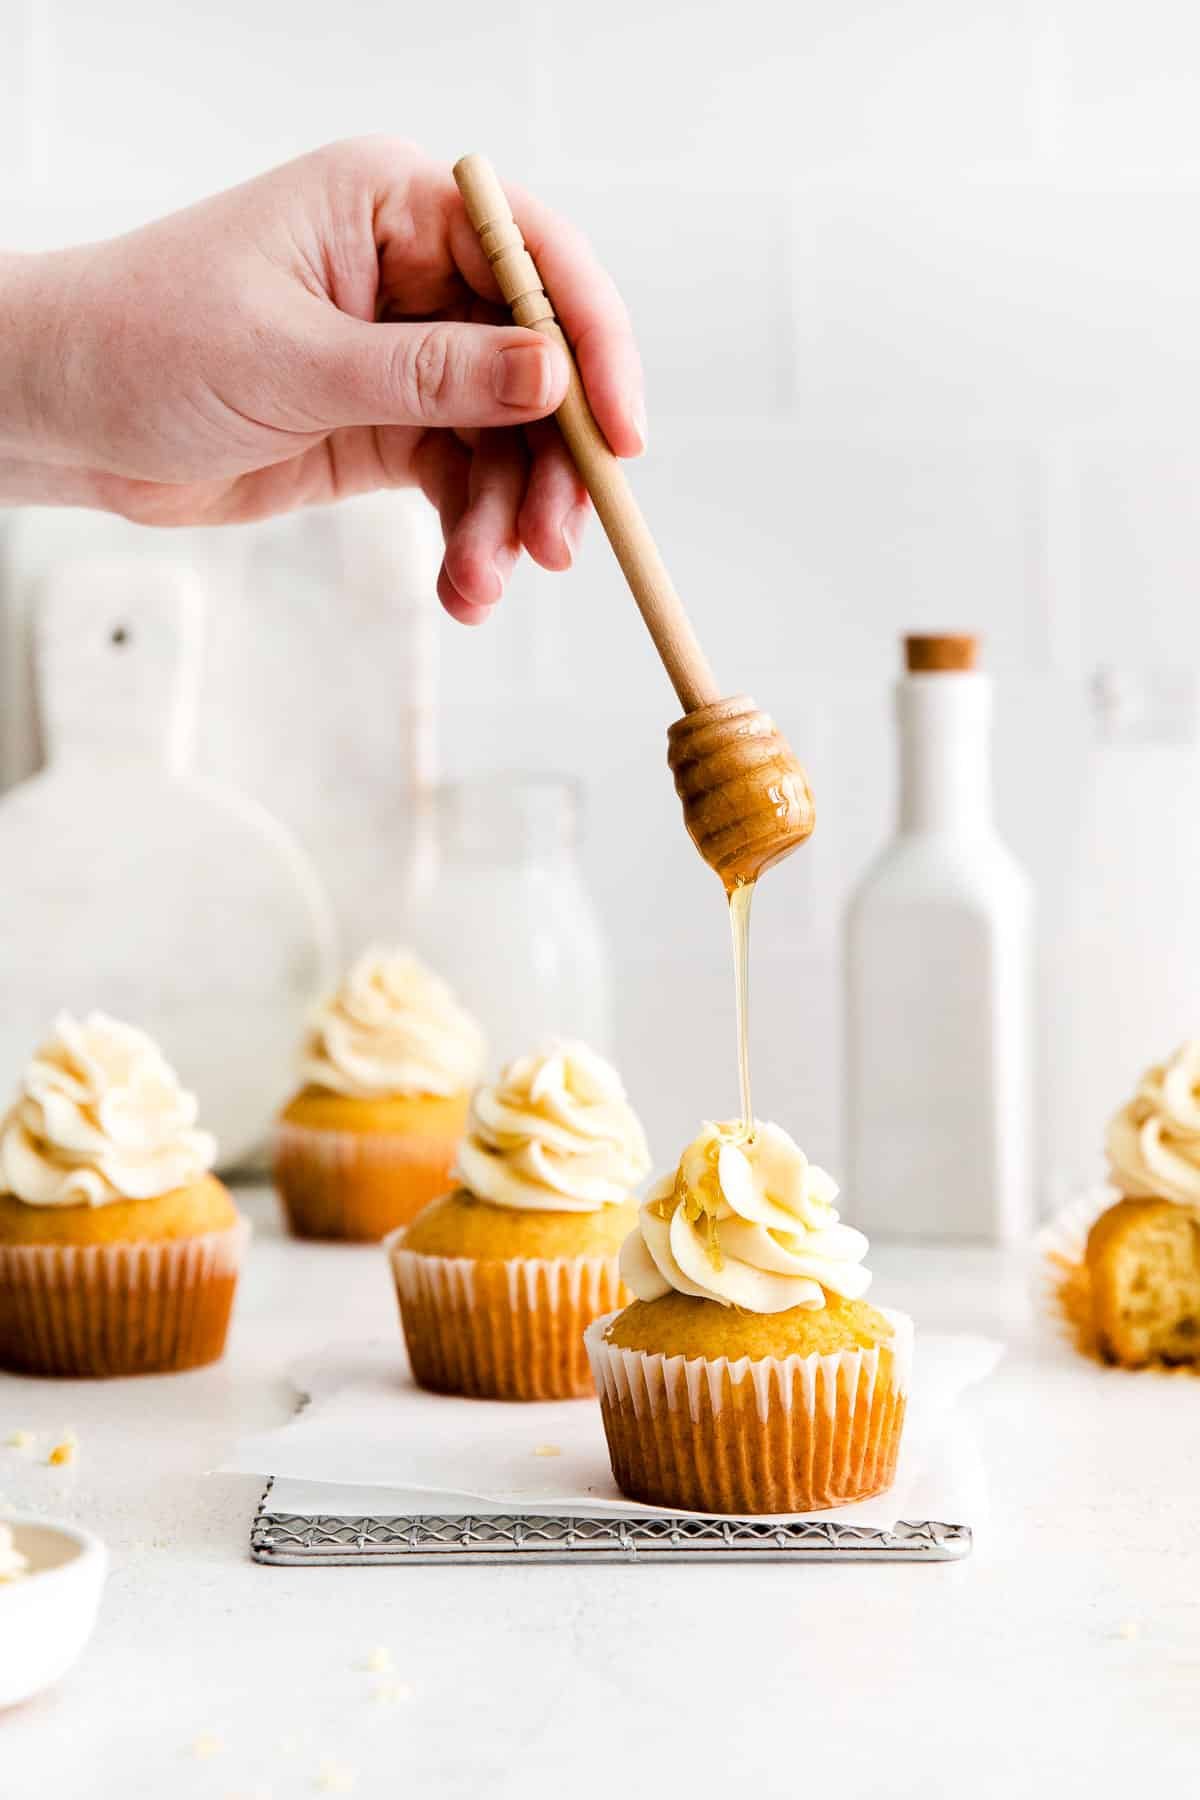 drizzling honey on honey cupcakes.